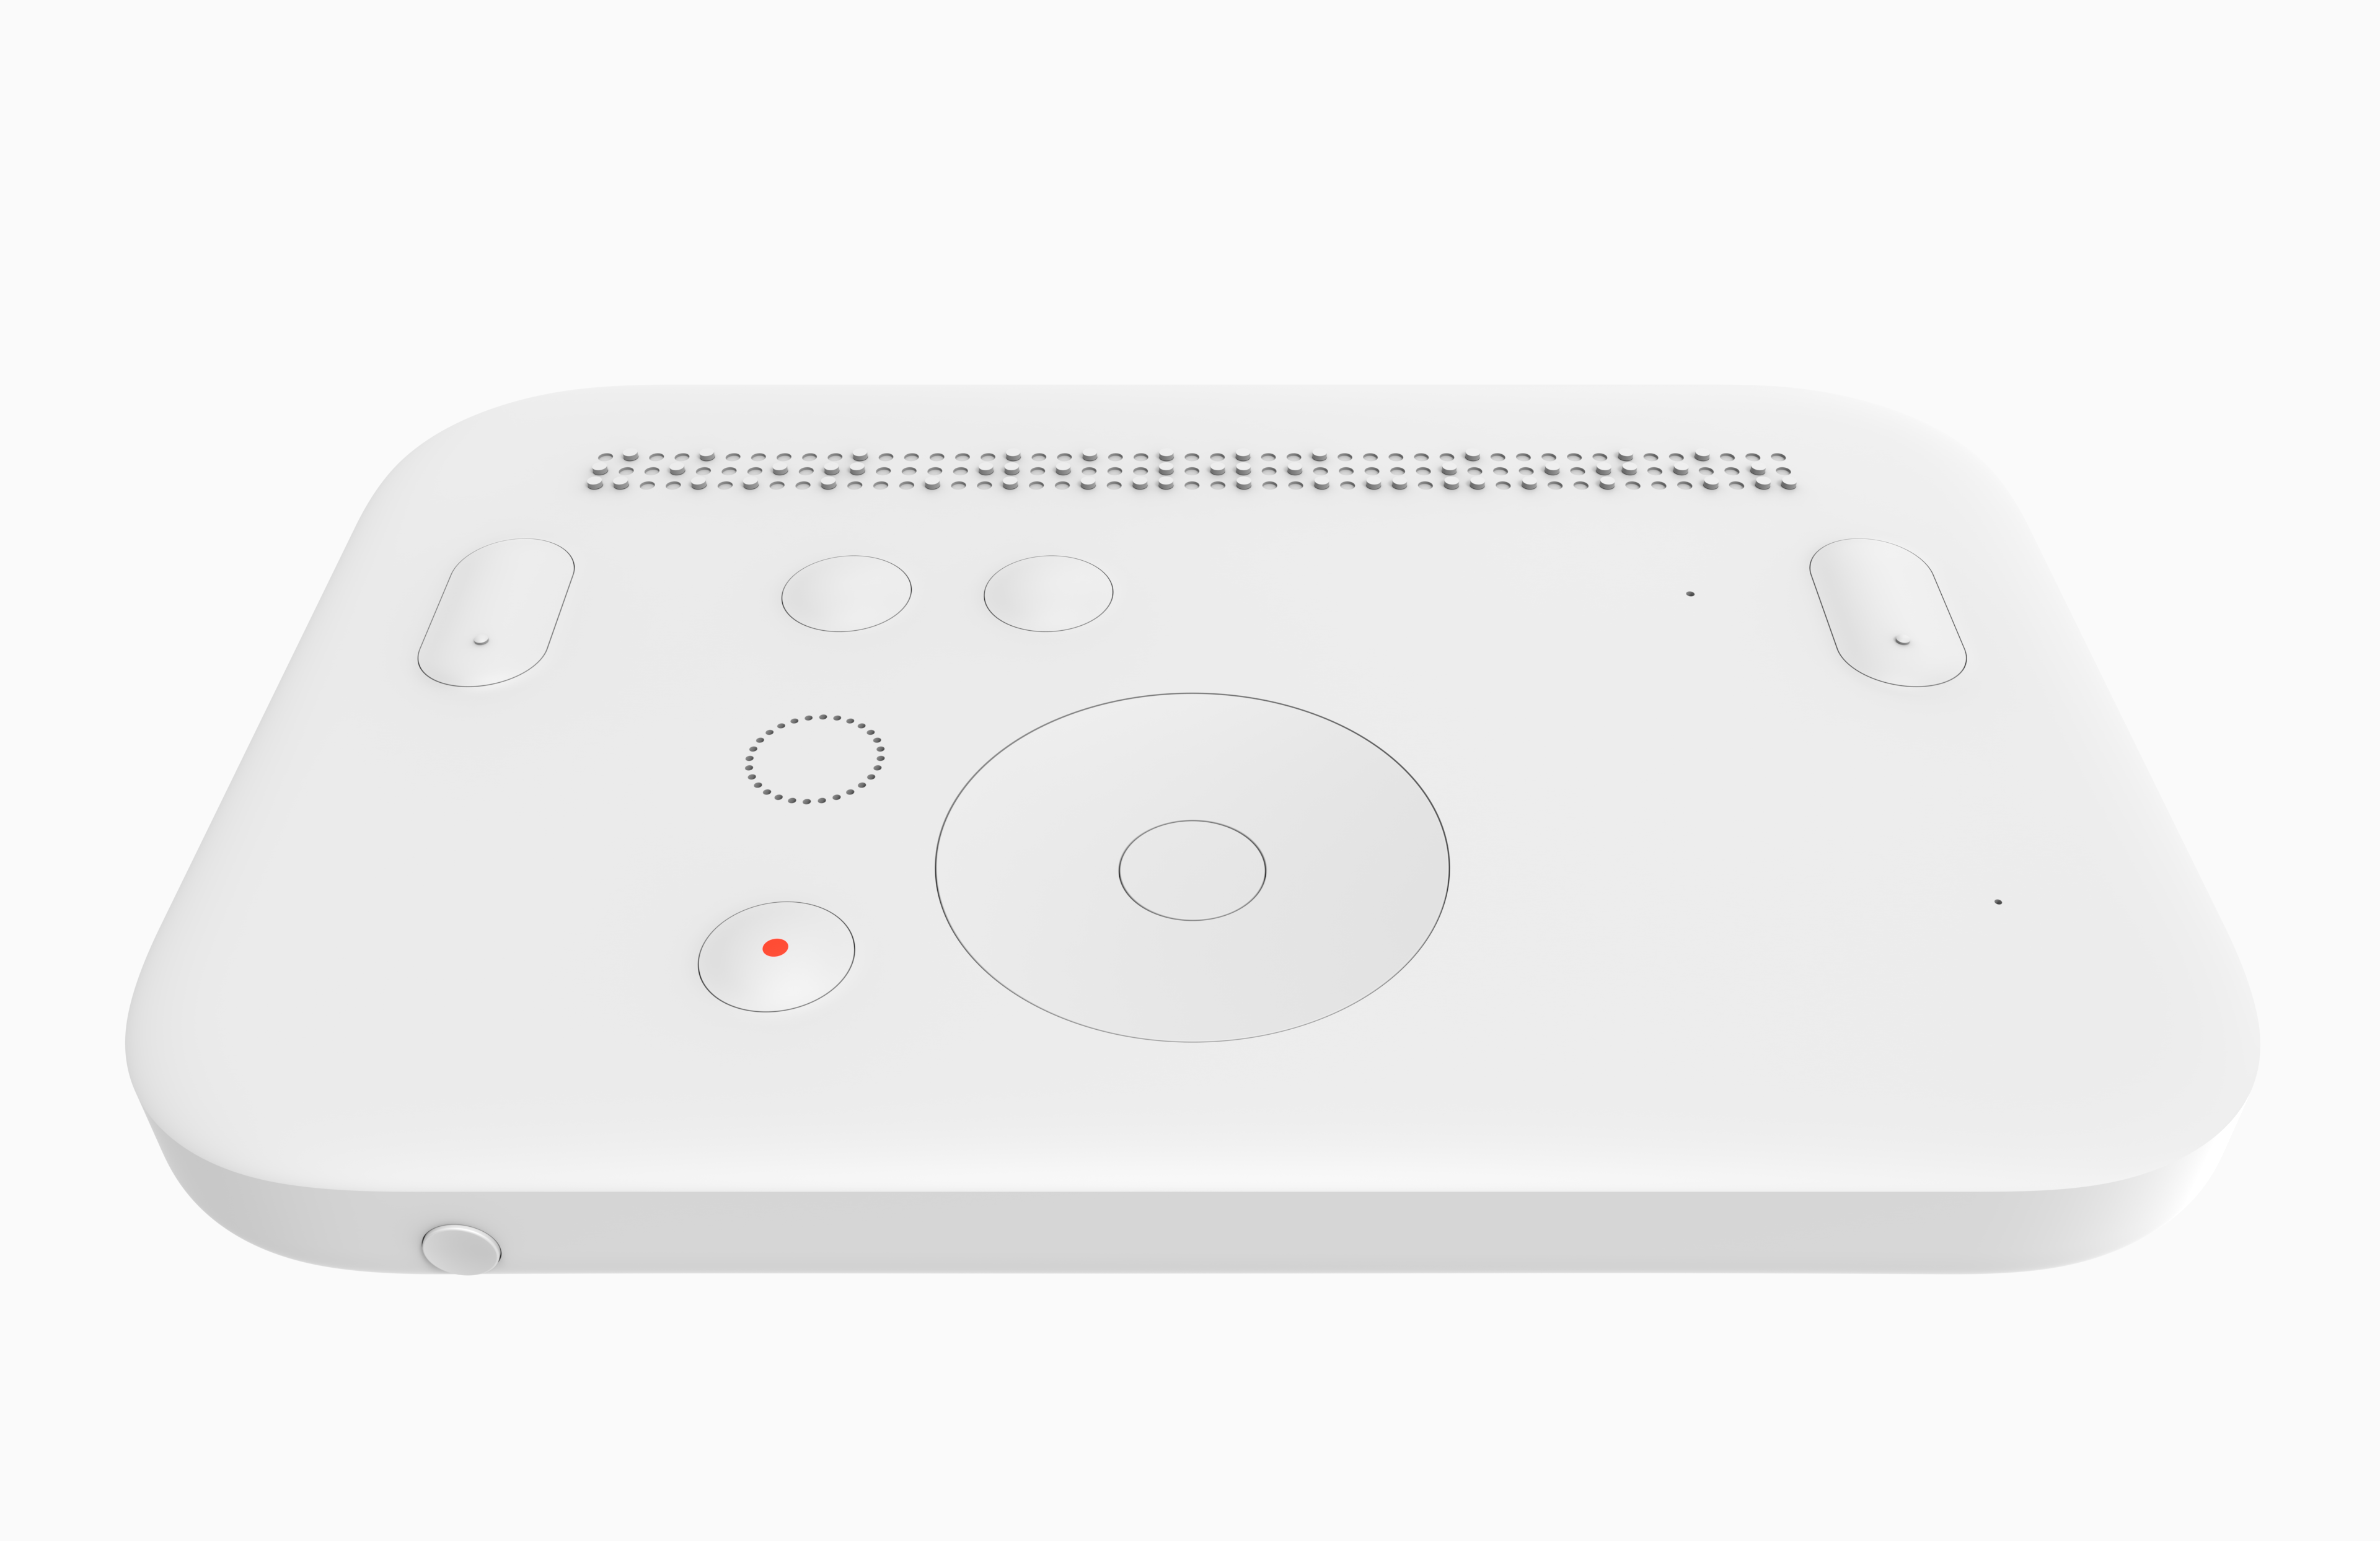 The top of the flat Dot Mini device with its buttons and line of Braille dots